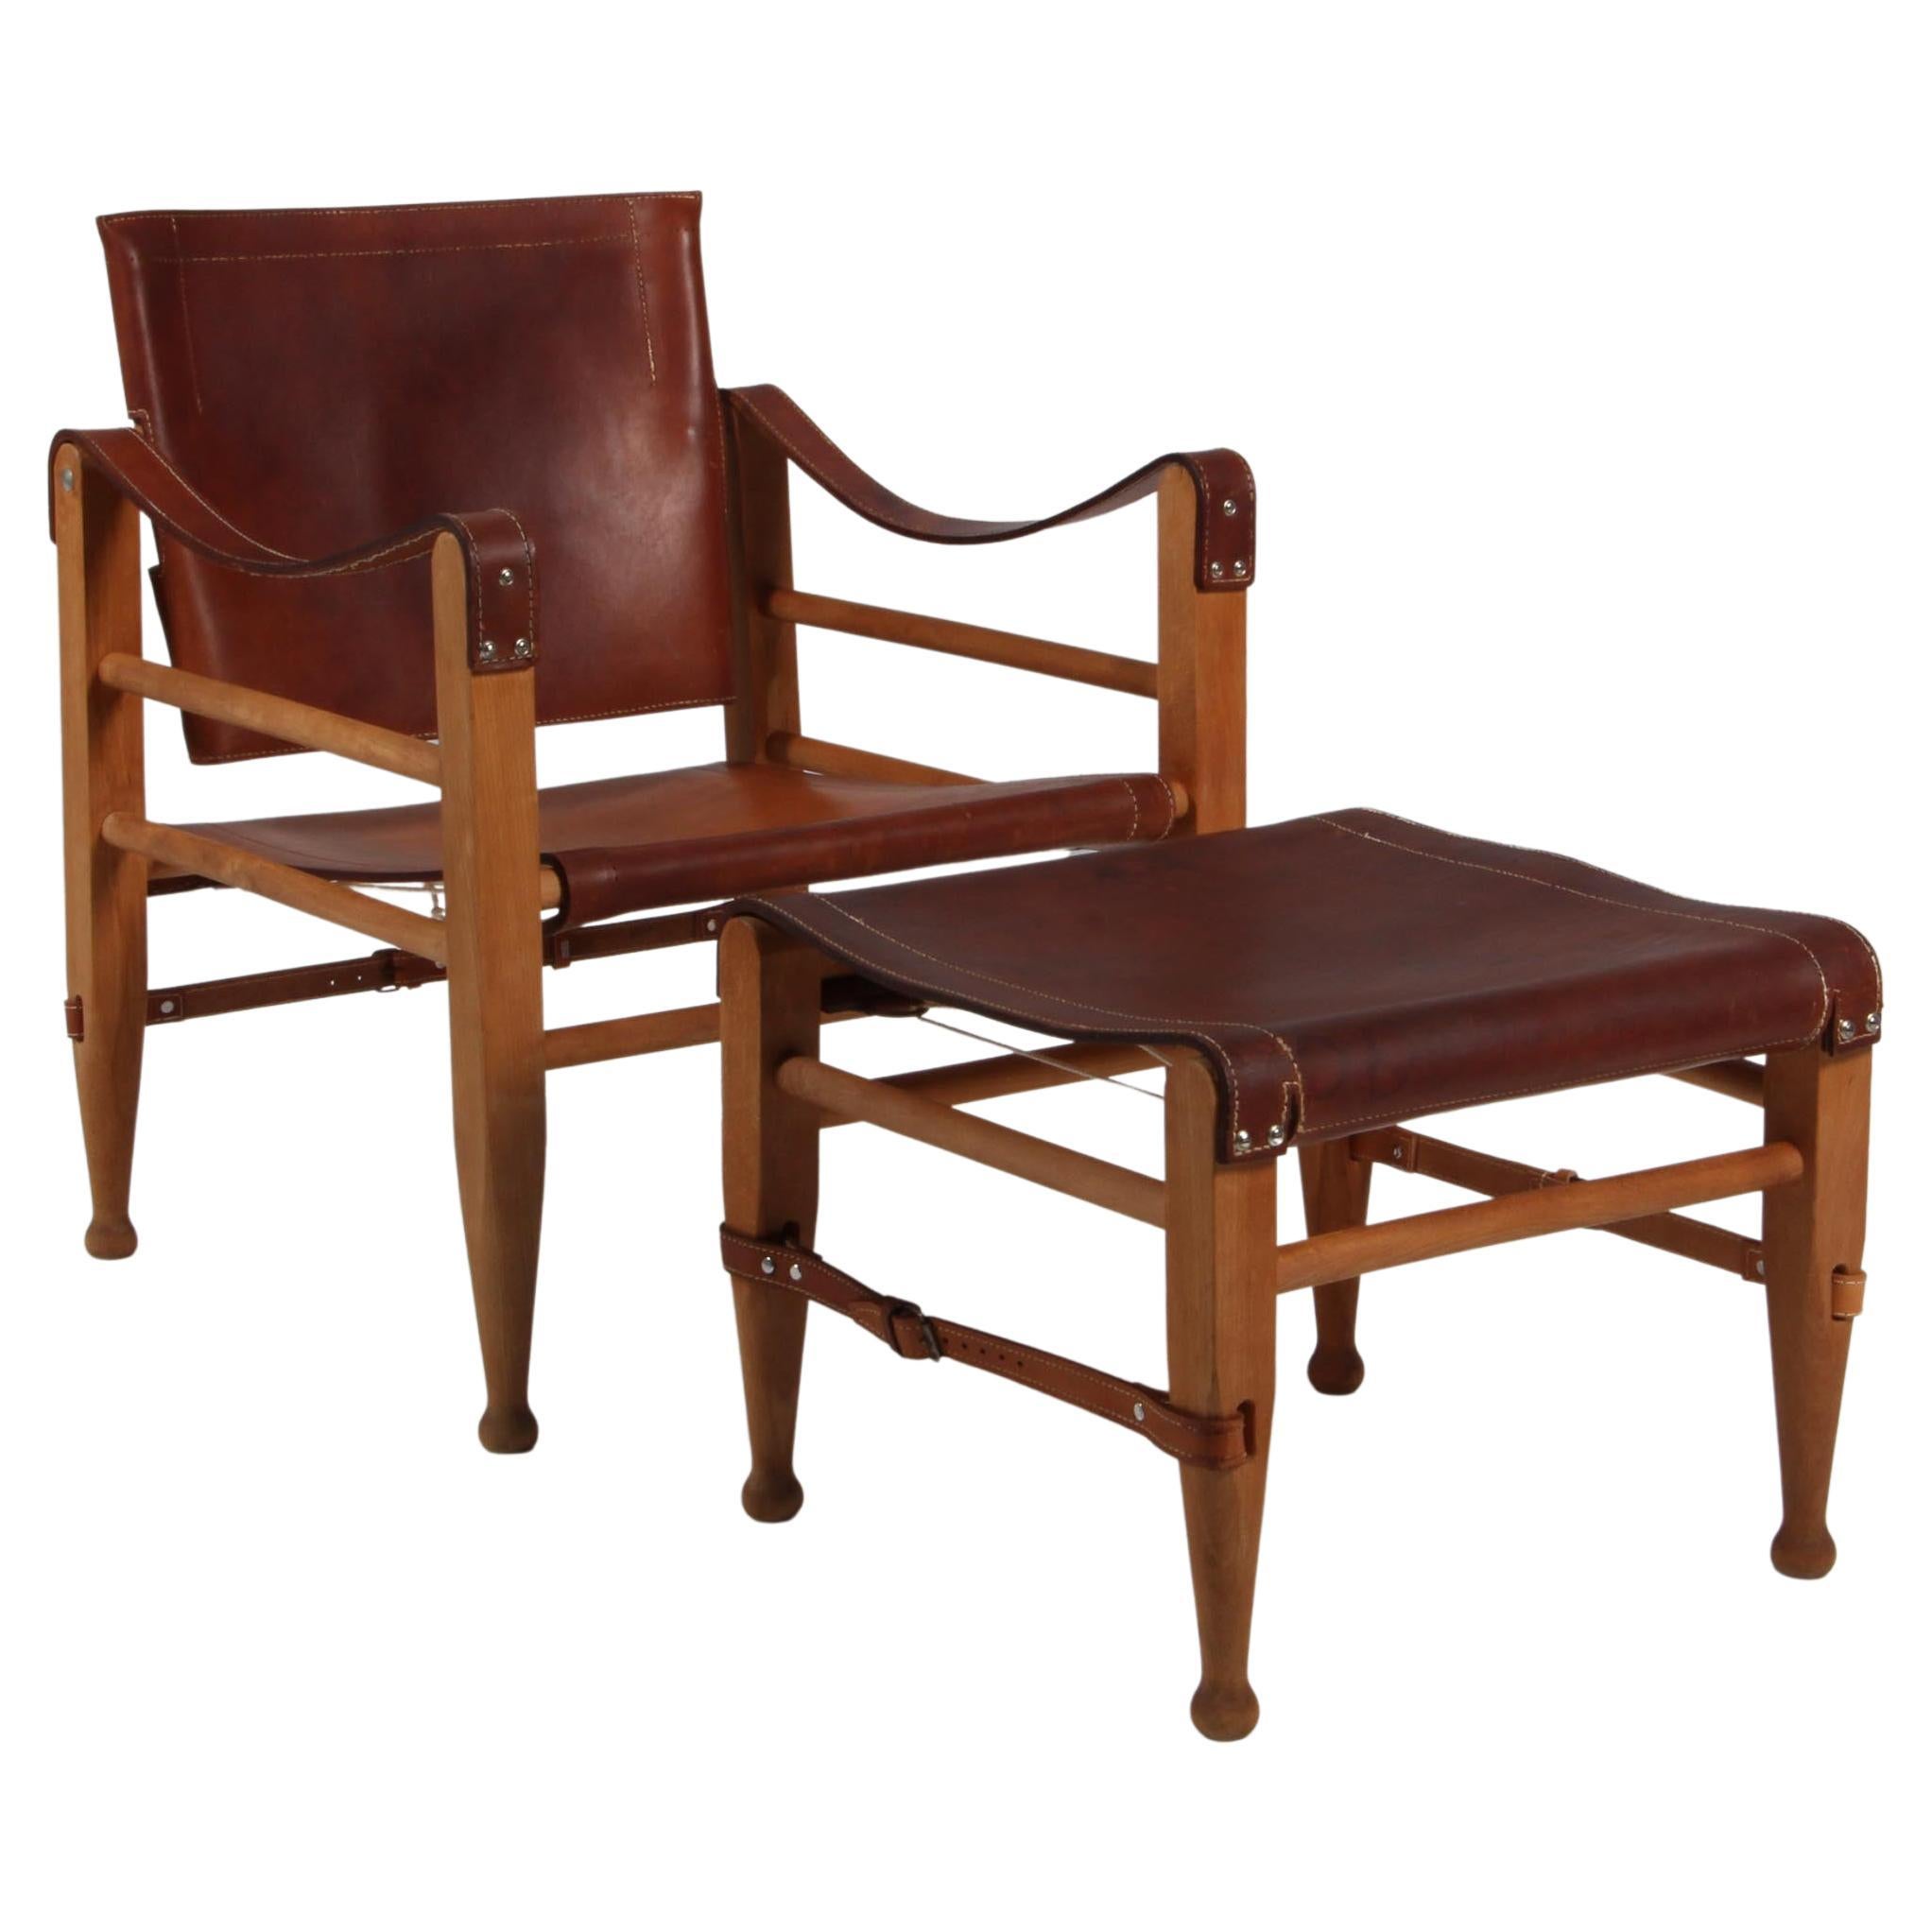 Aage Bruun and Son Safari Chairs in Patinated Tan Leather, Denmark ...